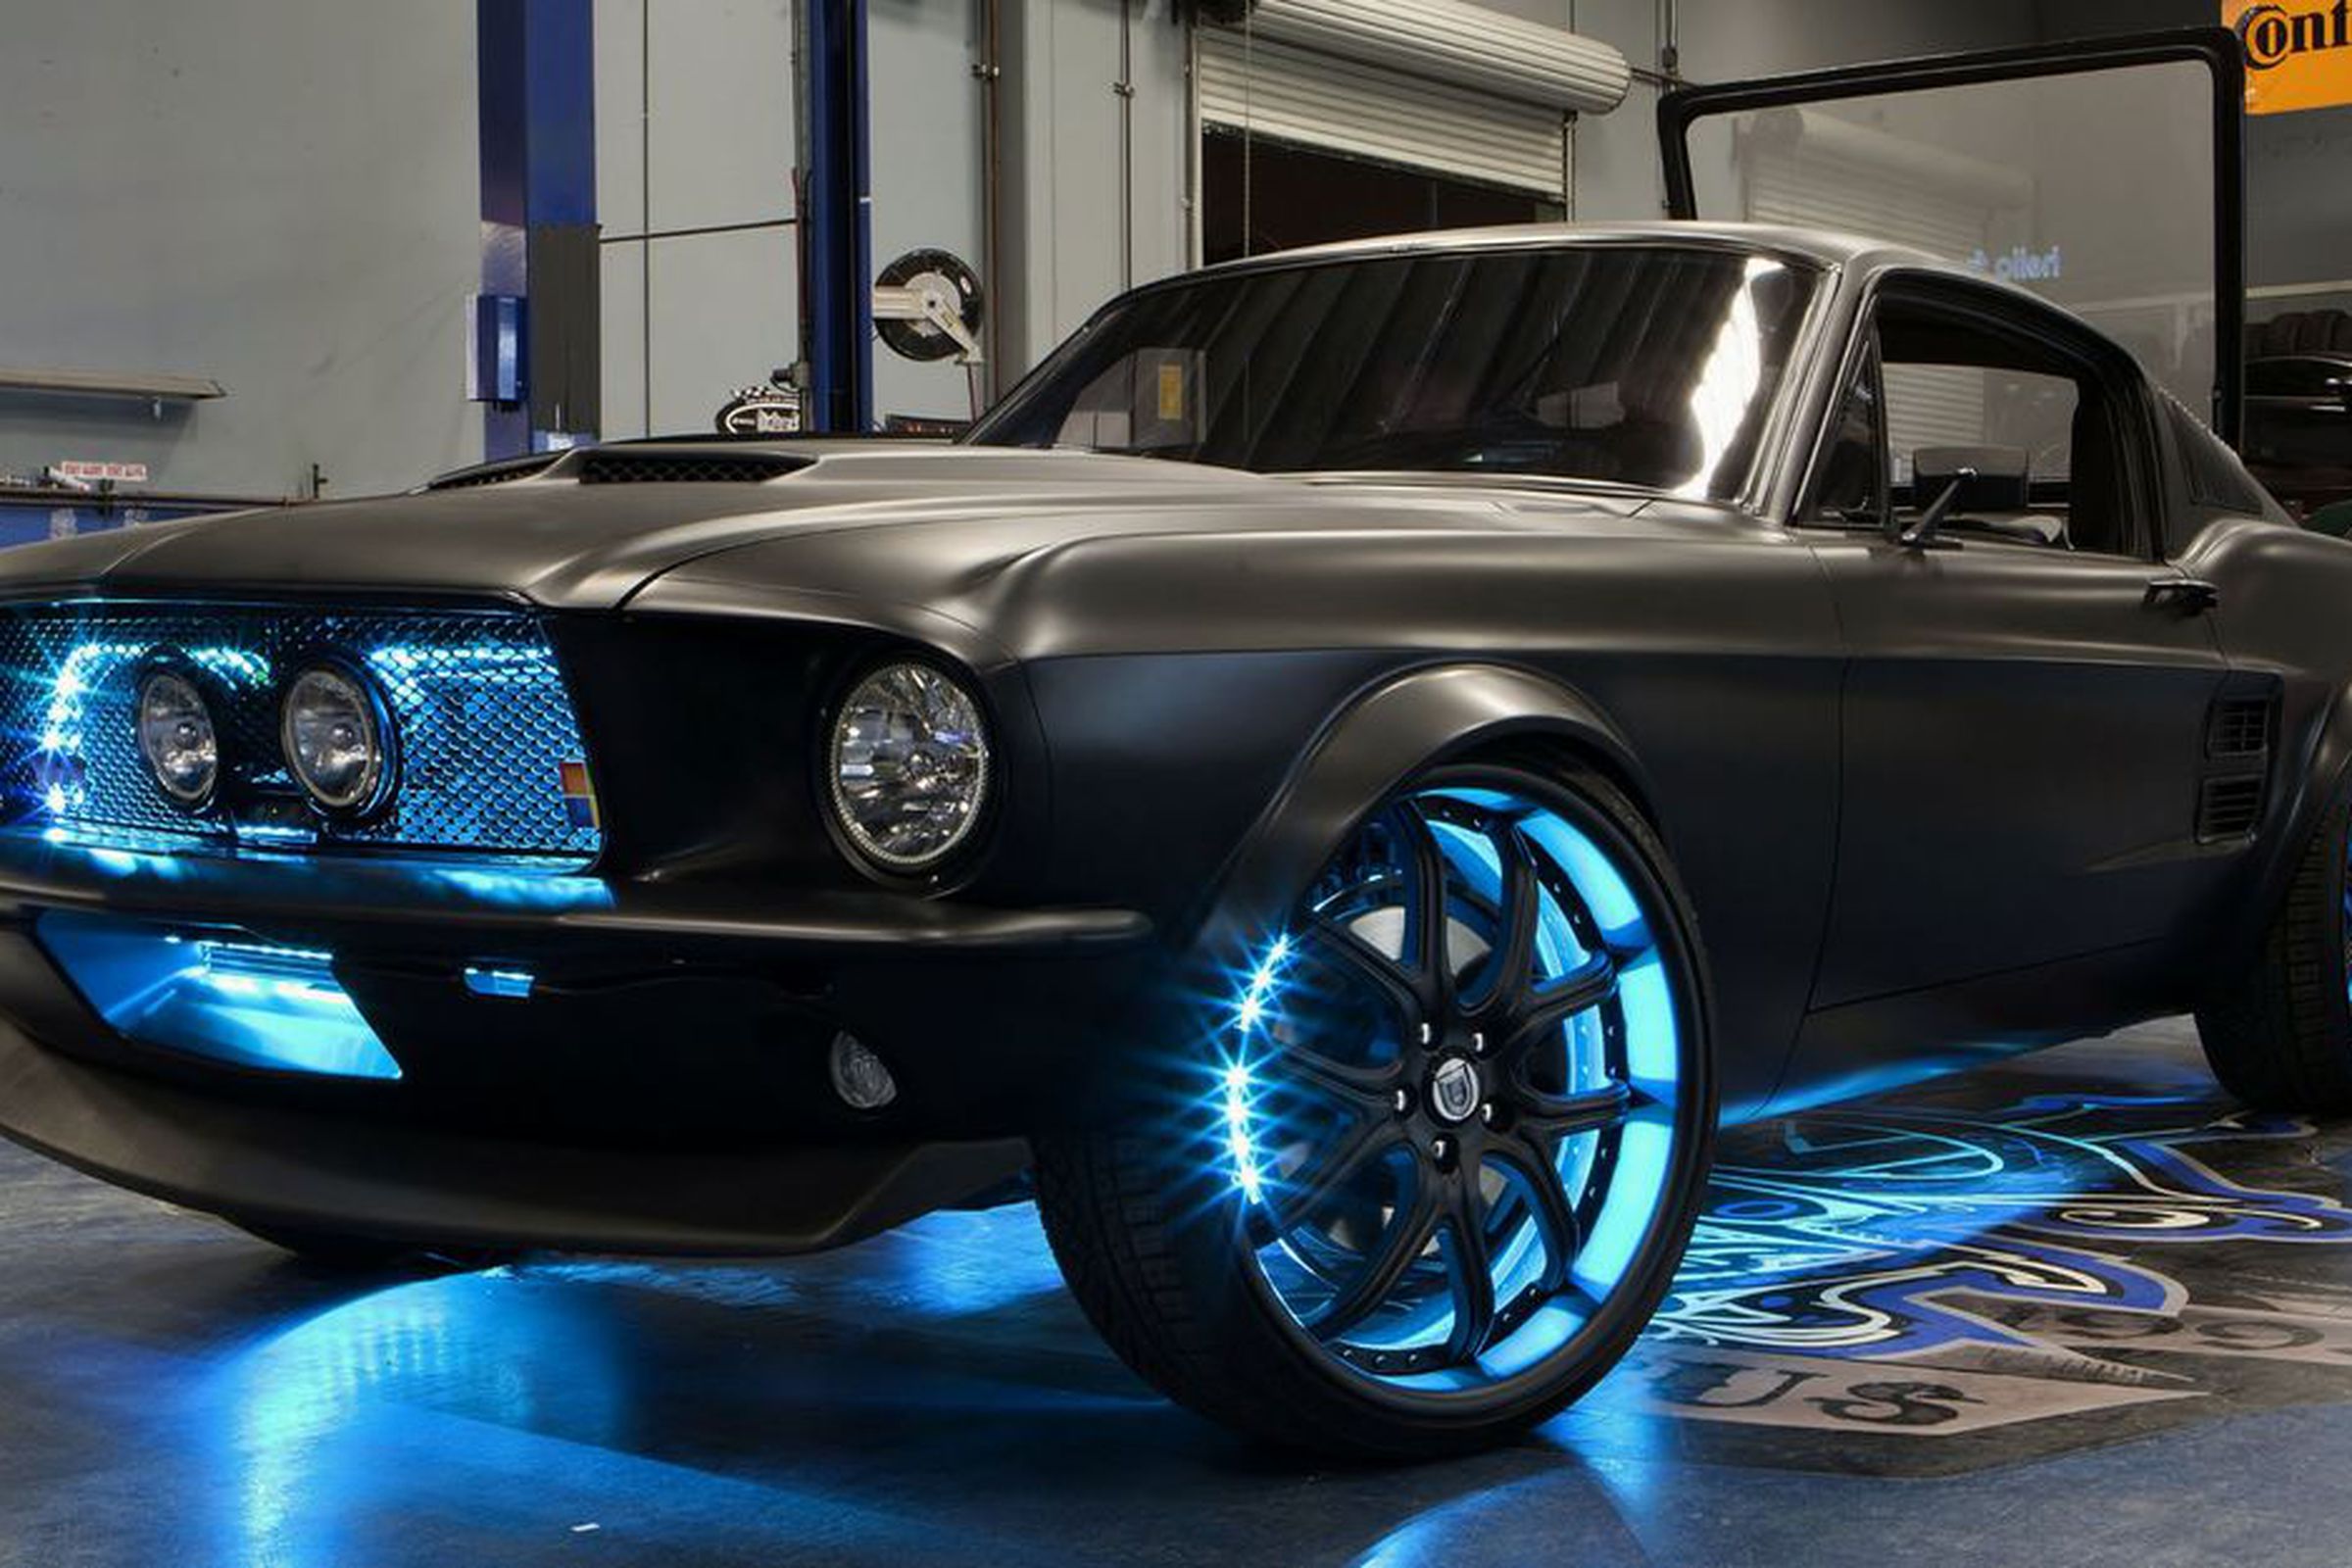 Gallery Photo: Microsoft 'Project Detroit' West Coast Customs Mustang photos